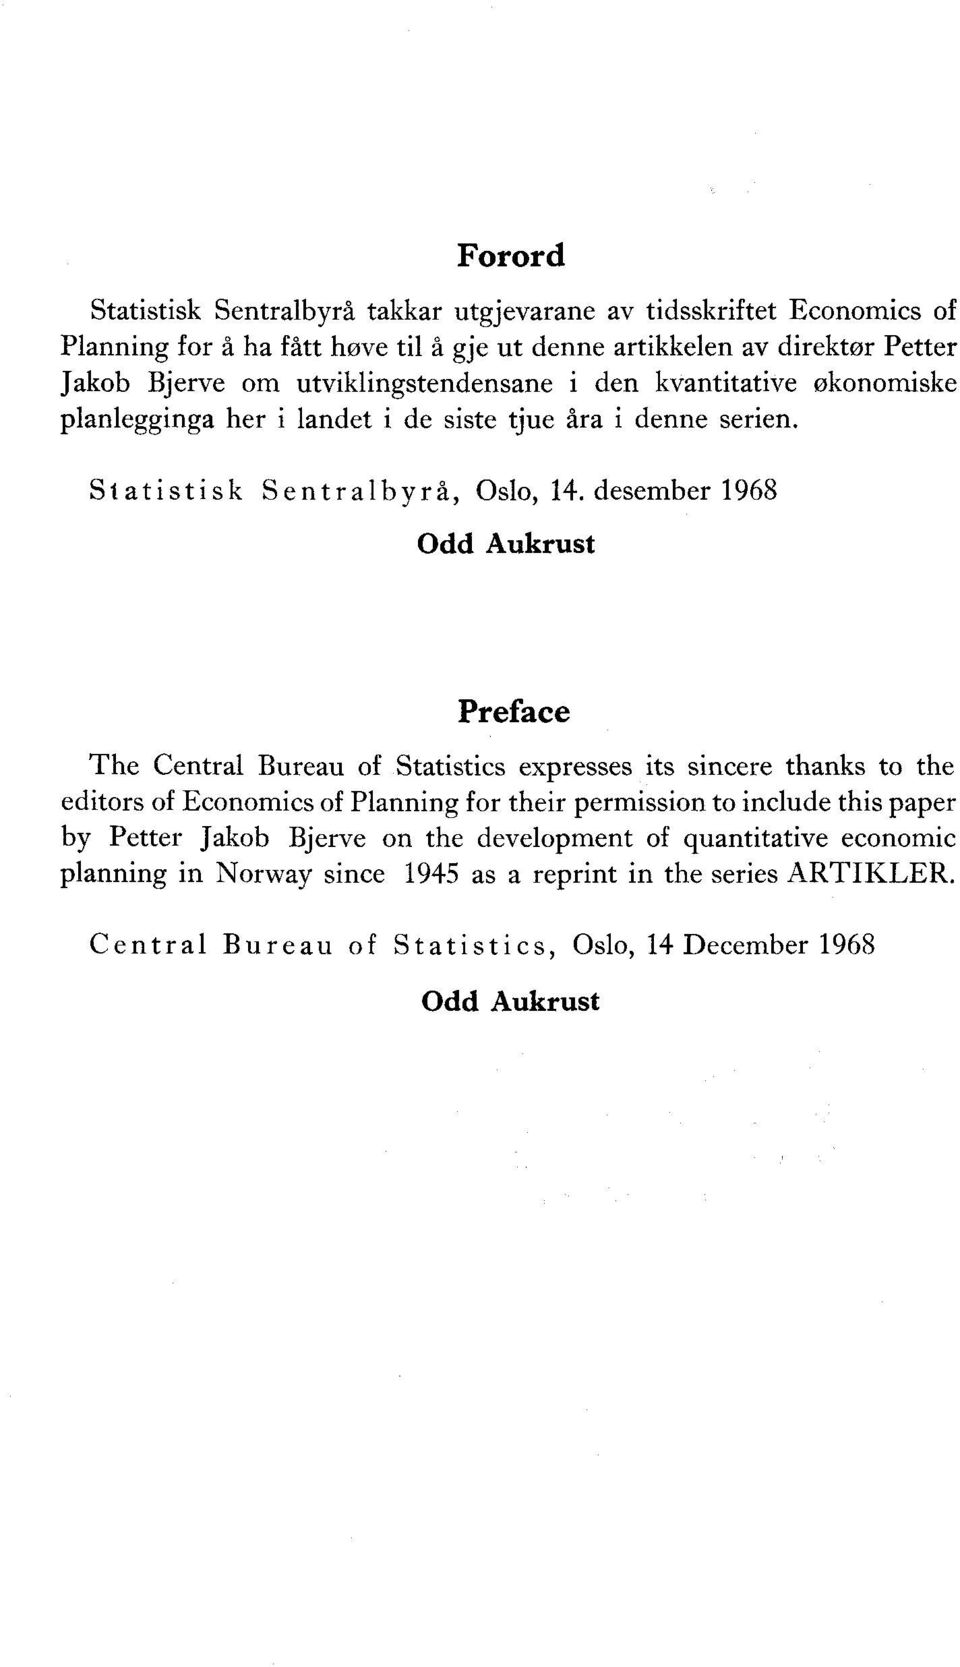 desember 1968 Odd Aukrust Preface The Central Bureau of Statistics expresses its sincere thanks to the editors of Economics of Planning for their permission to include this